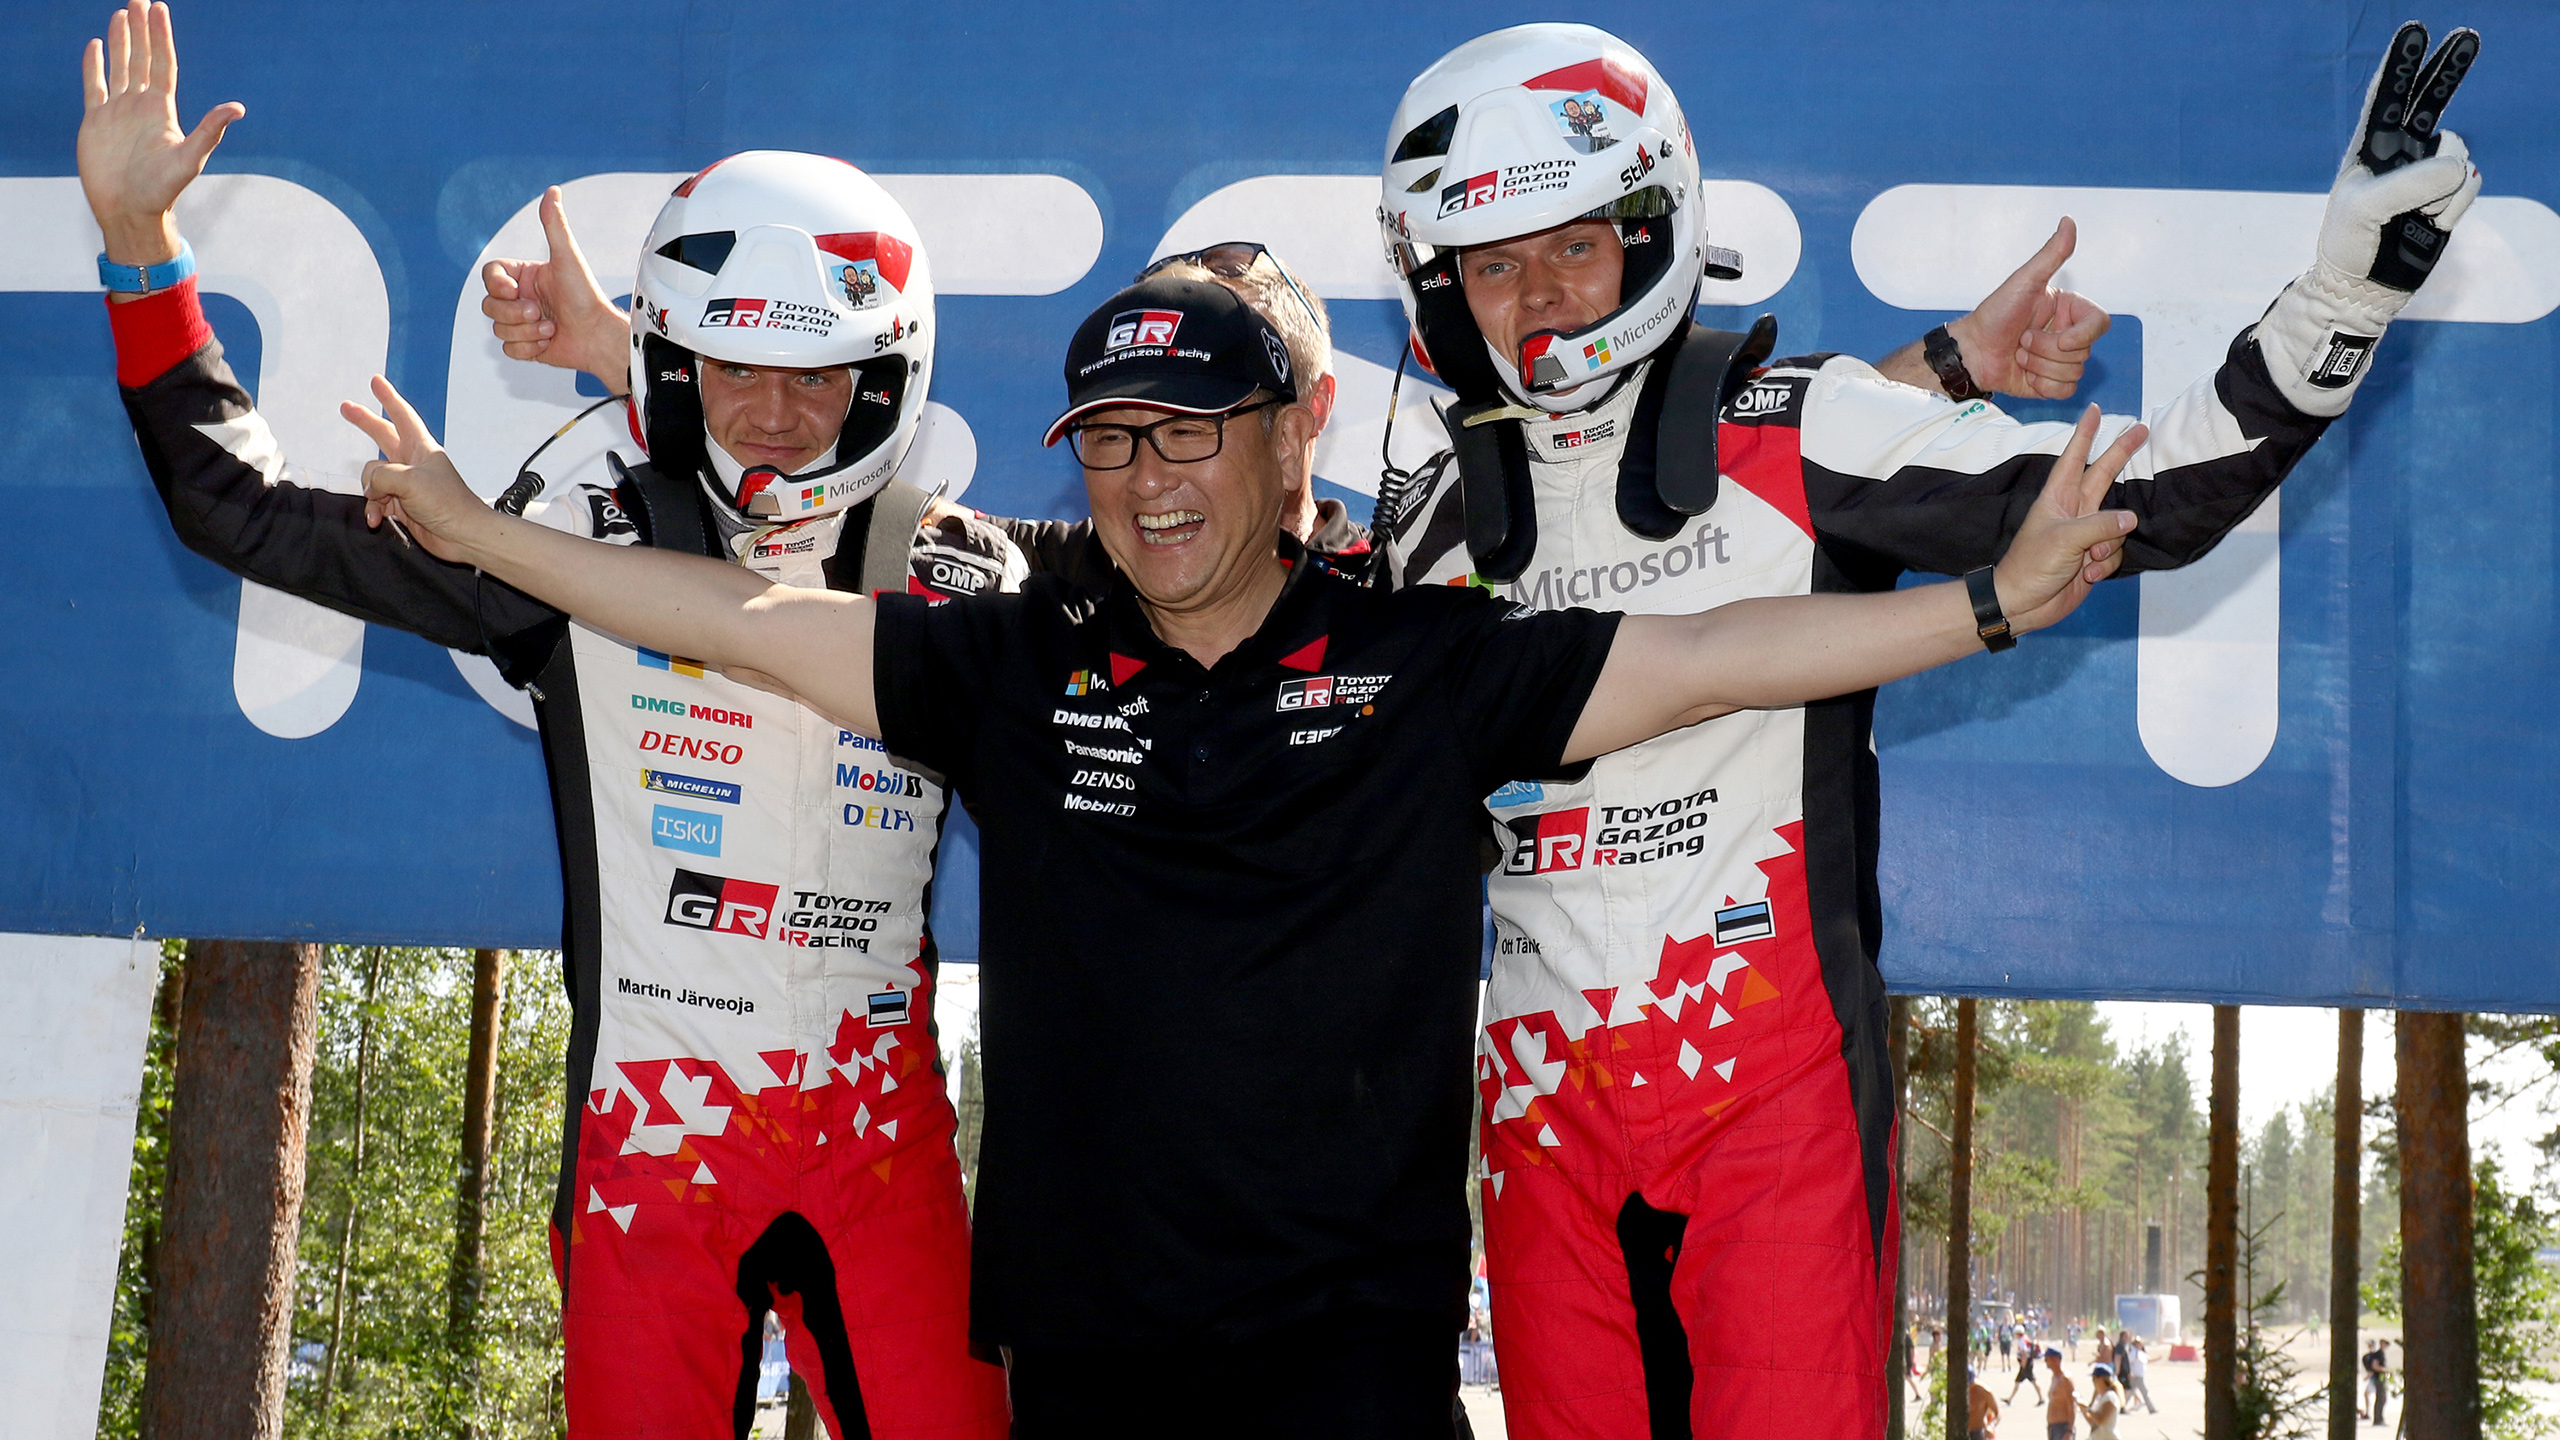 Akio Toyoda Wants You to Ask Why He’s Palling Around With ‘Mr. Celica’